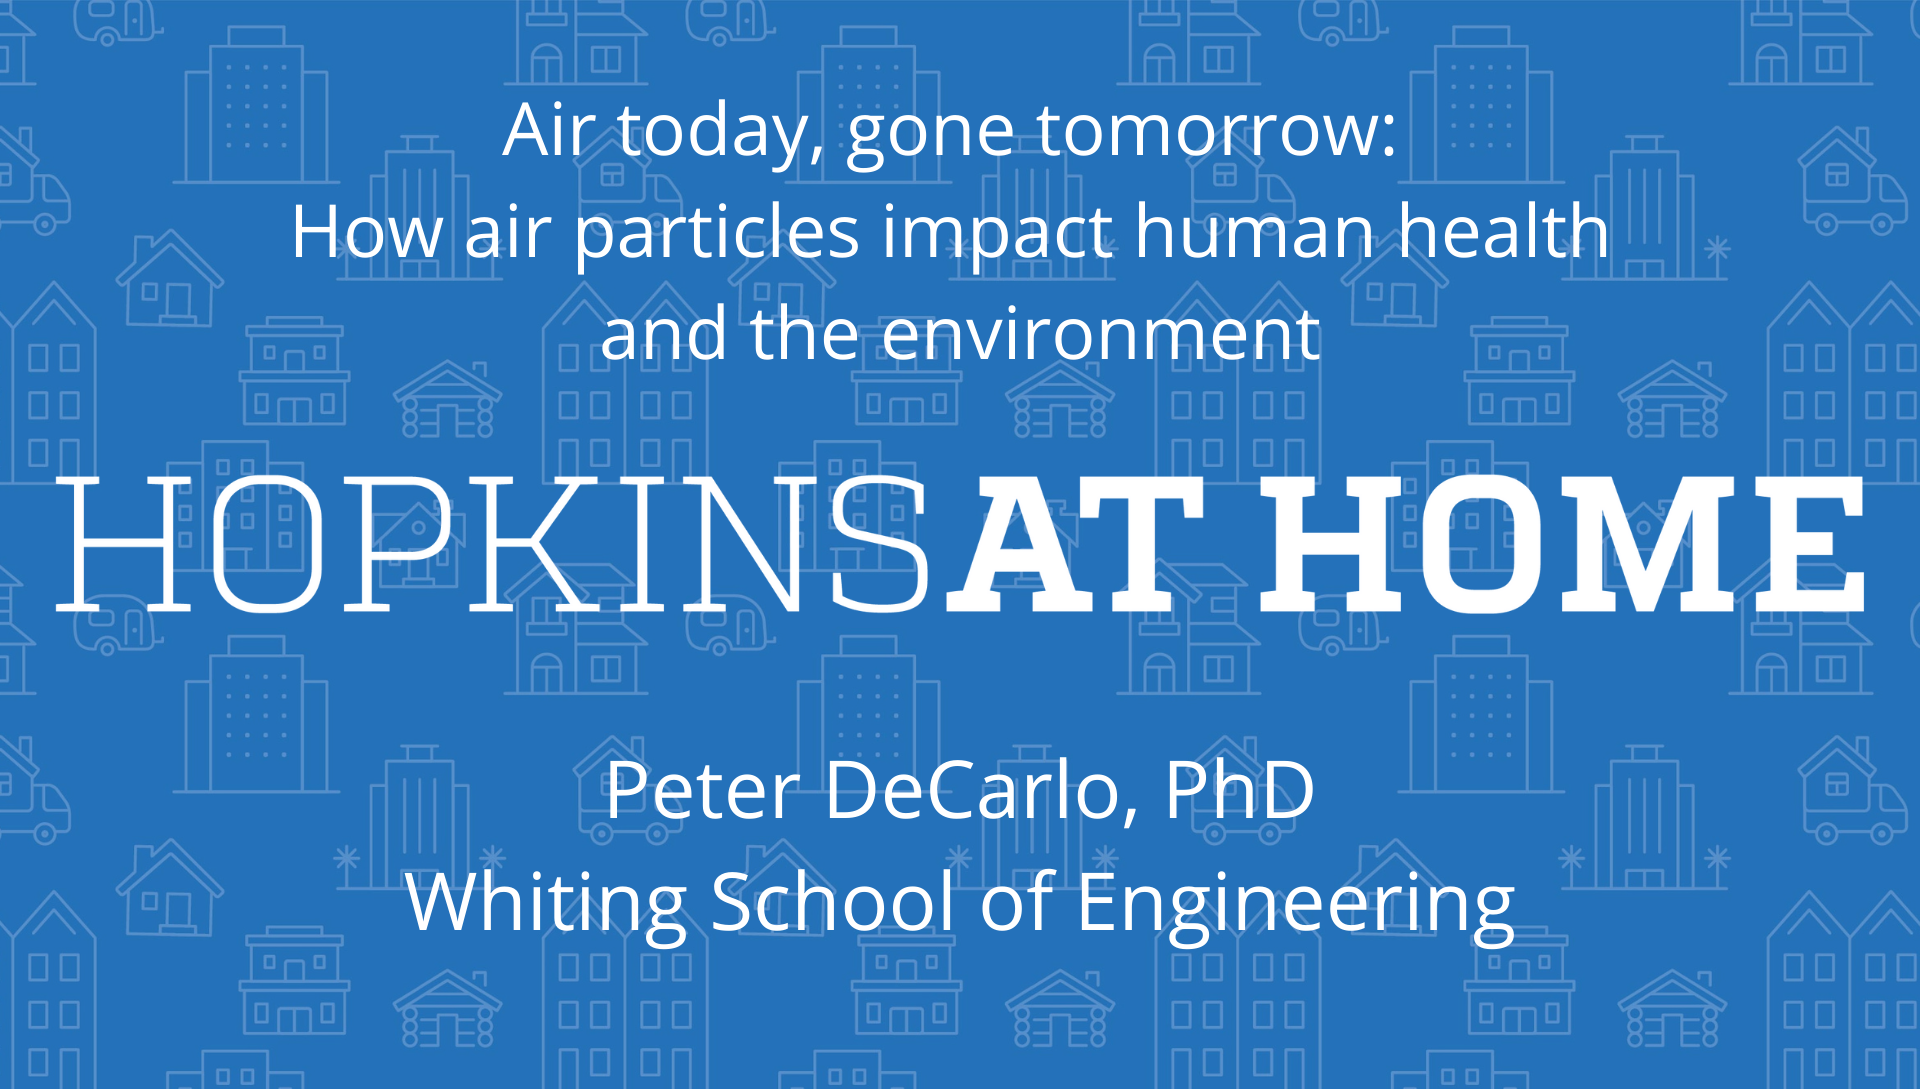 Air today, gone tomorrow: How air particles impact human health and the environment